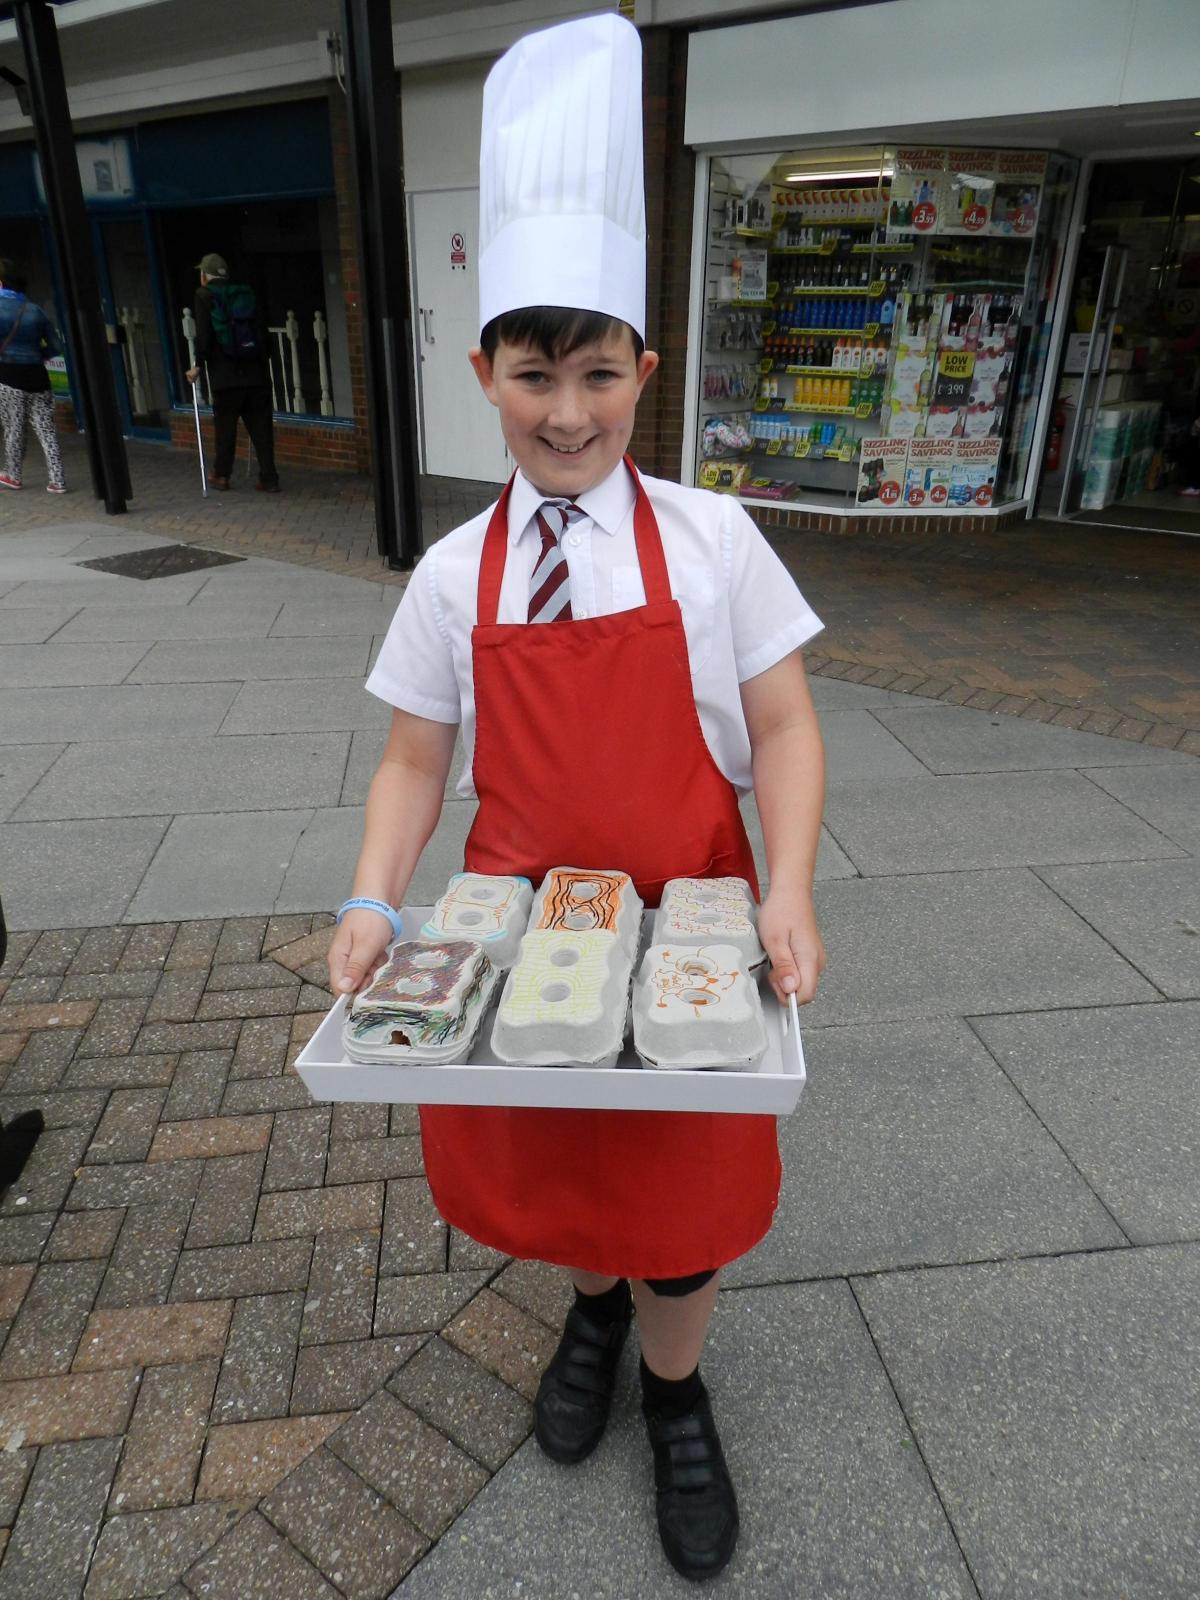 Youngsters from Years 3 and 4 at Redhill School were selling eggs from Fenton Farm in decorated boxes, and making Welsh cakes on site.
